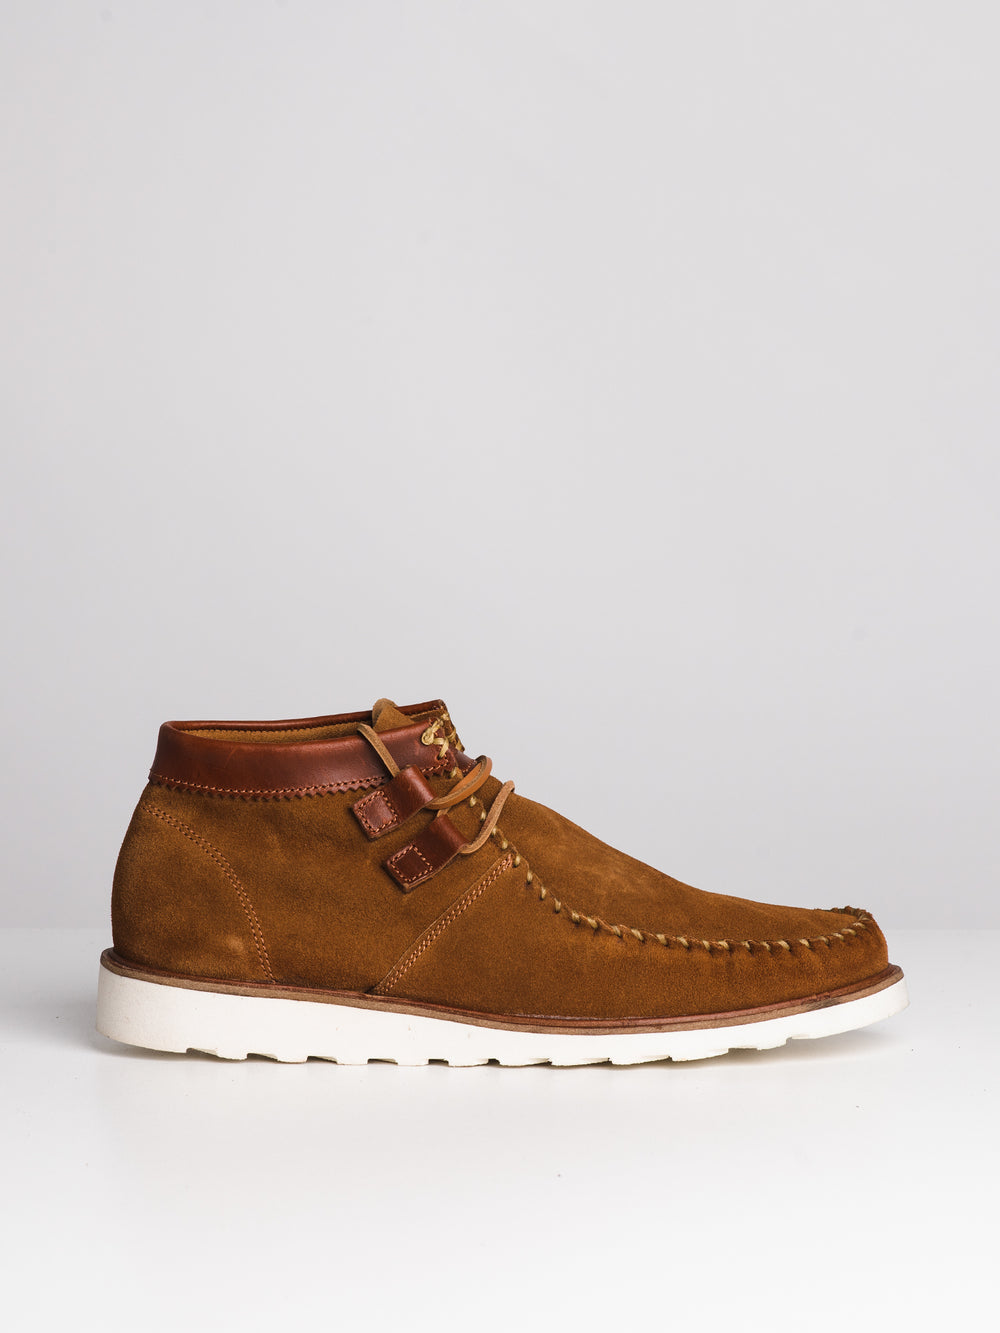 MENS MIGUEL SHOE - CLEARANCE